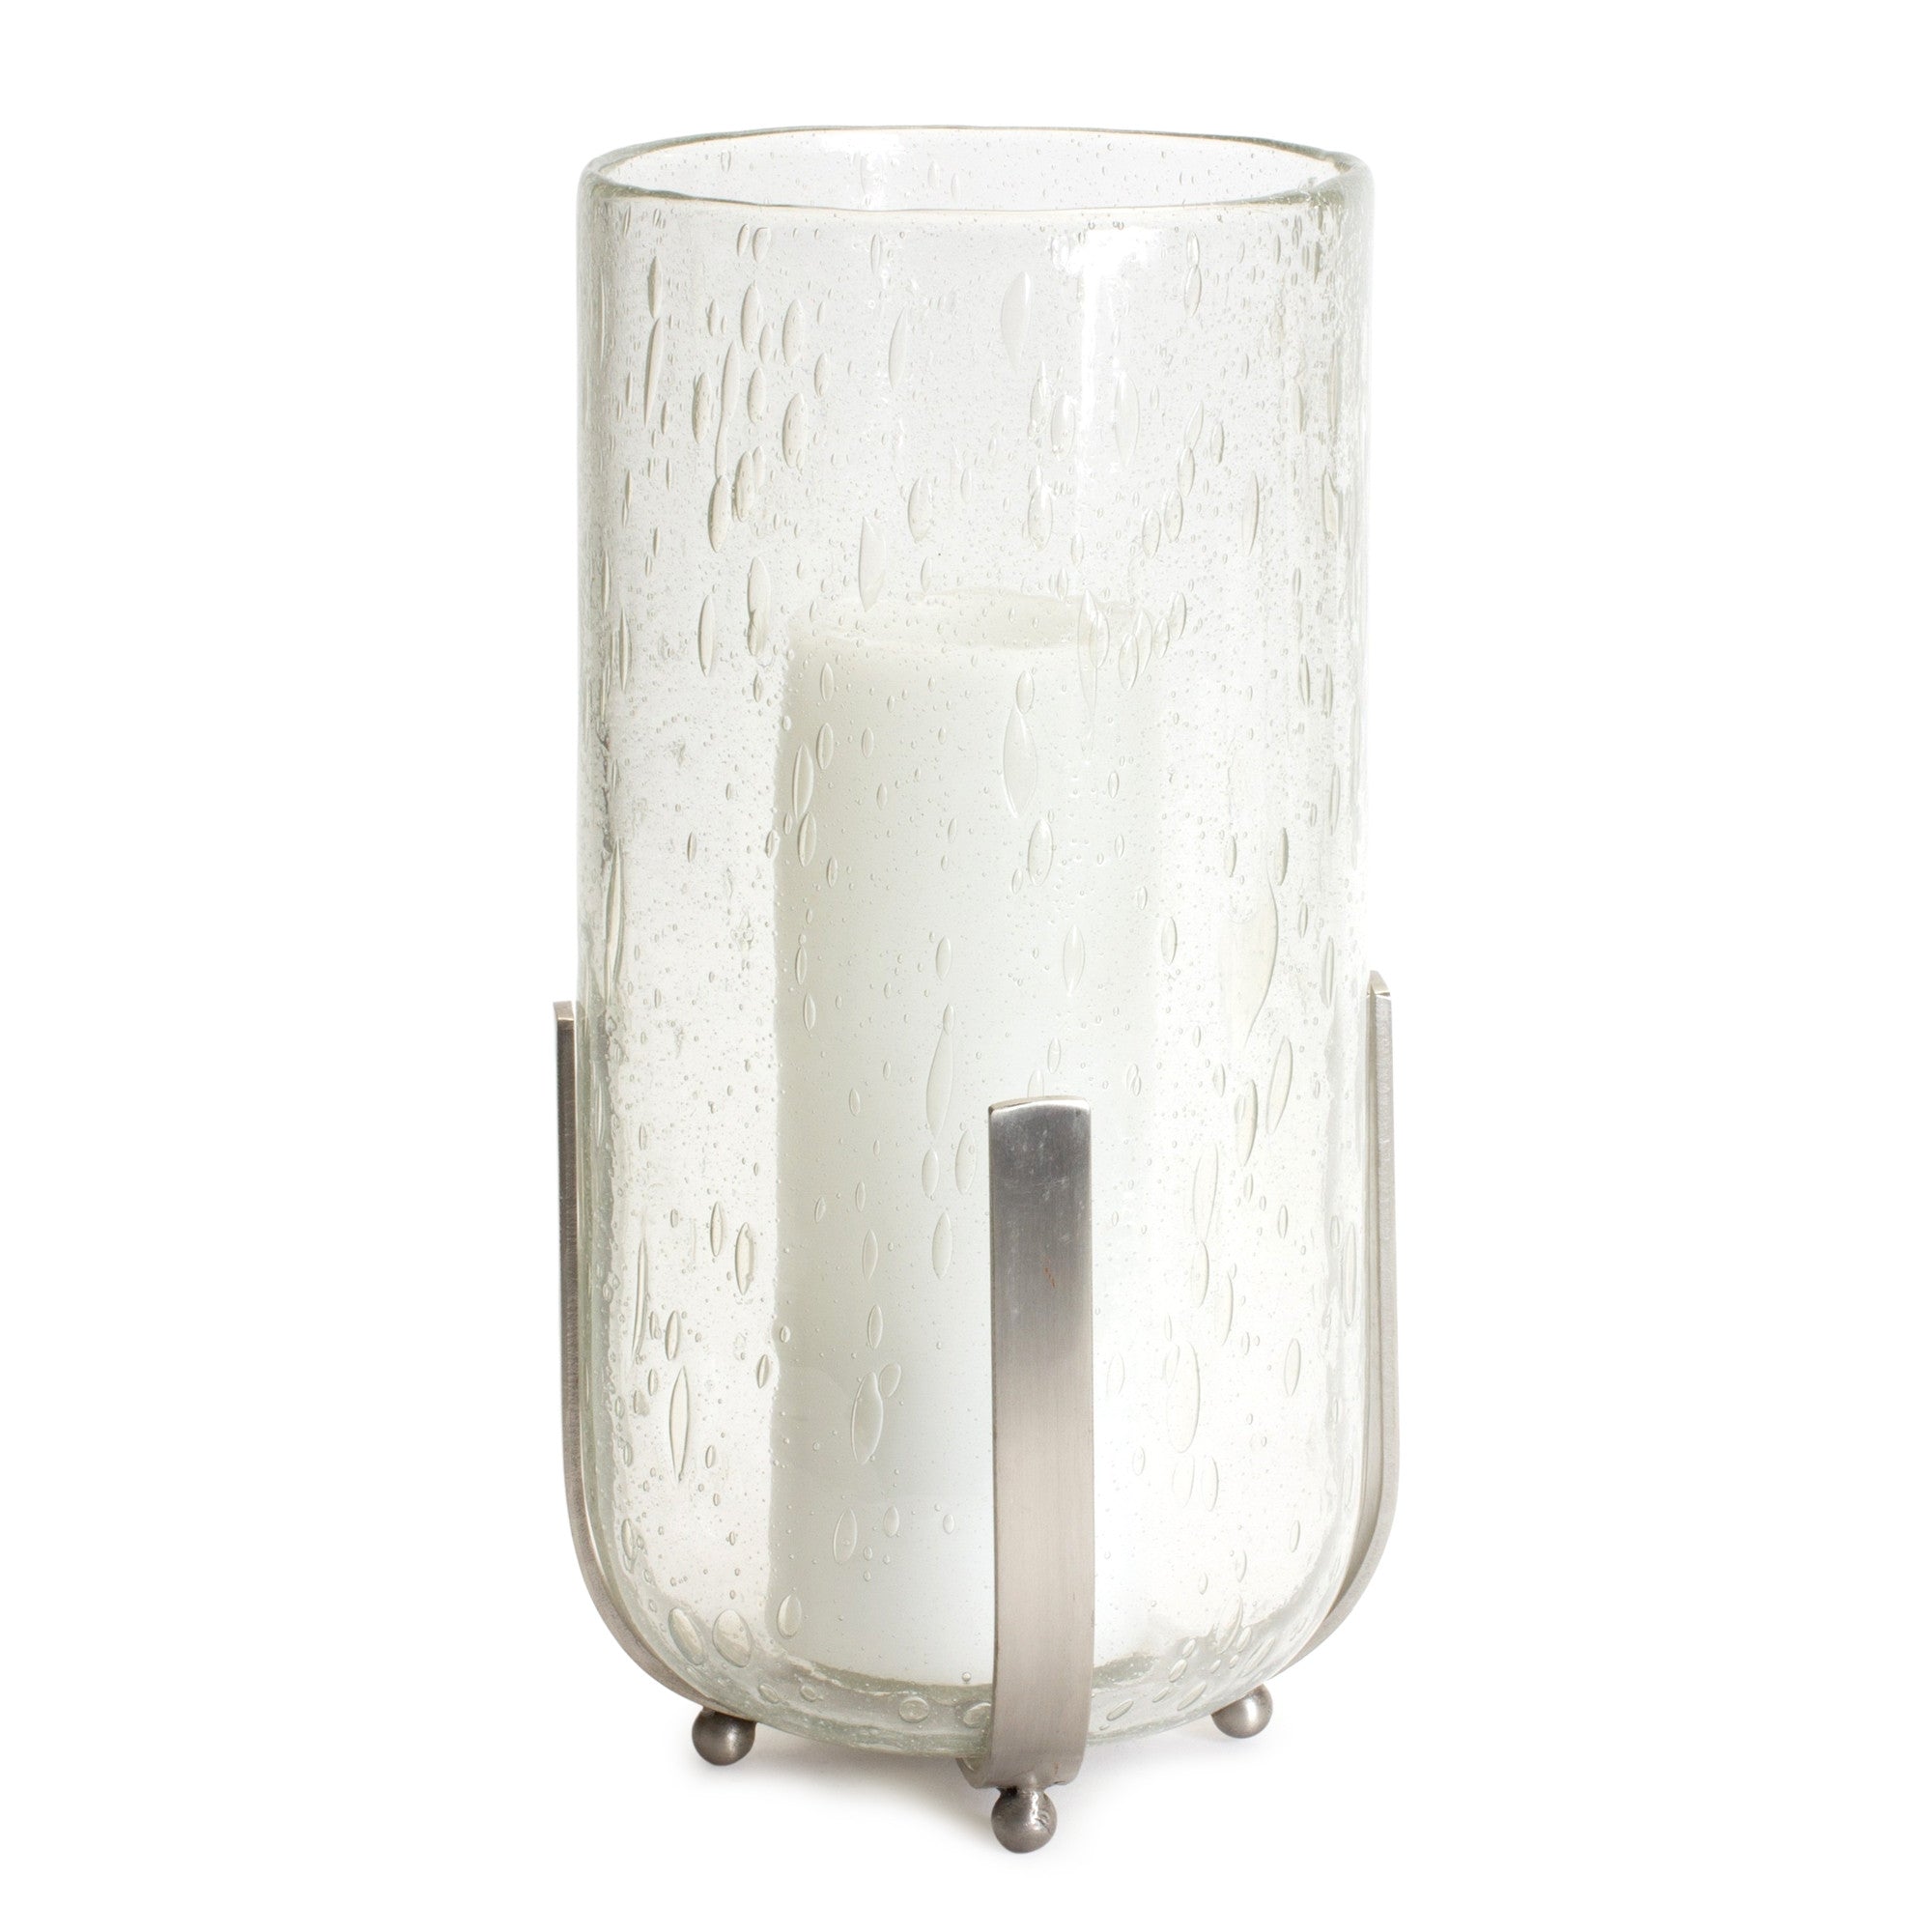 6" Silver Flameless Tabletop Hurricane Candle Holder